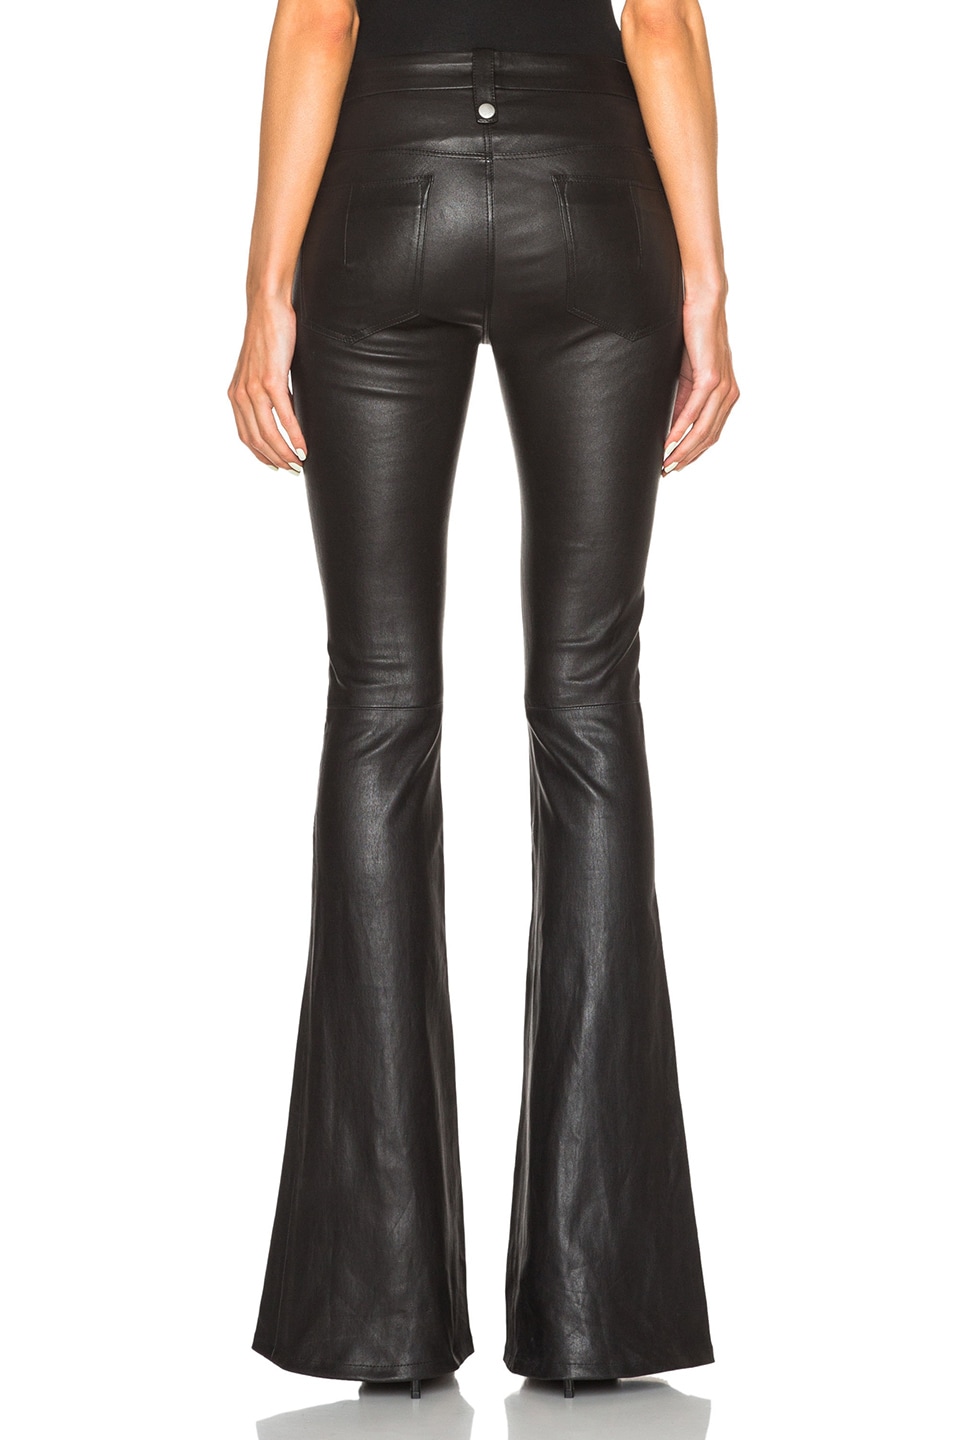 Unravel Lace Front Flare Leather Pants in Black | FWRD